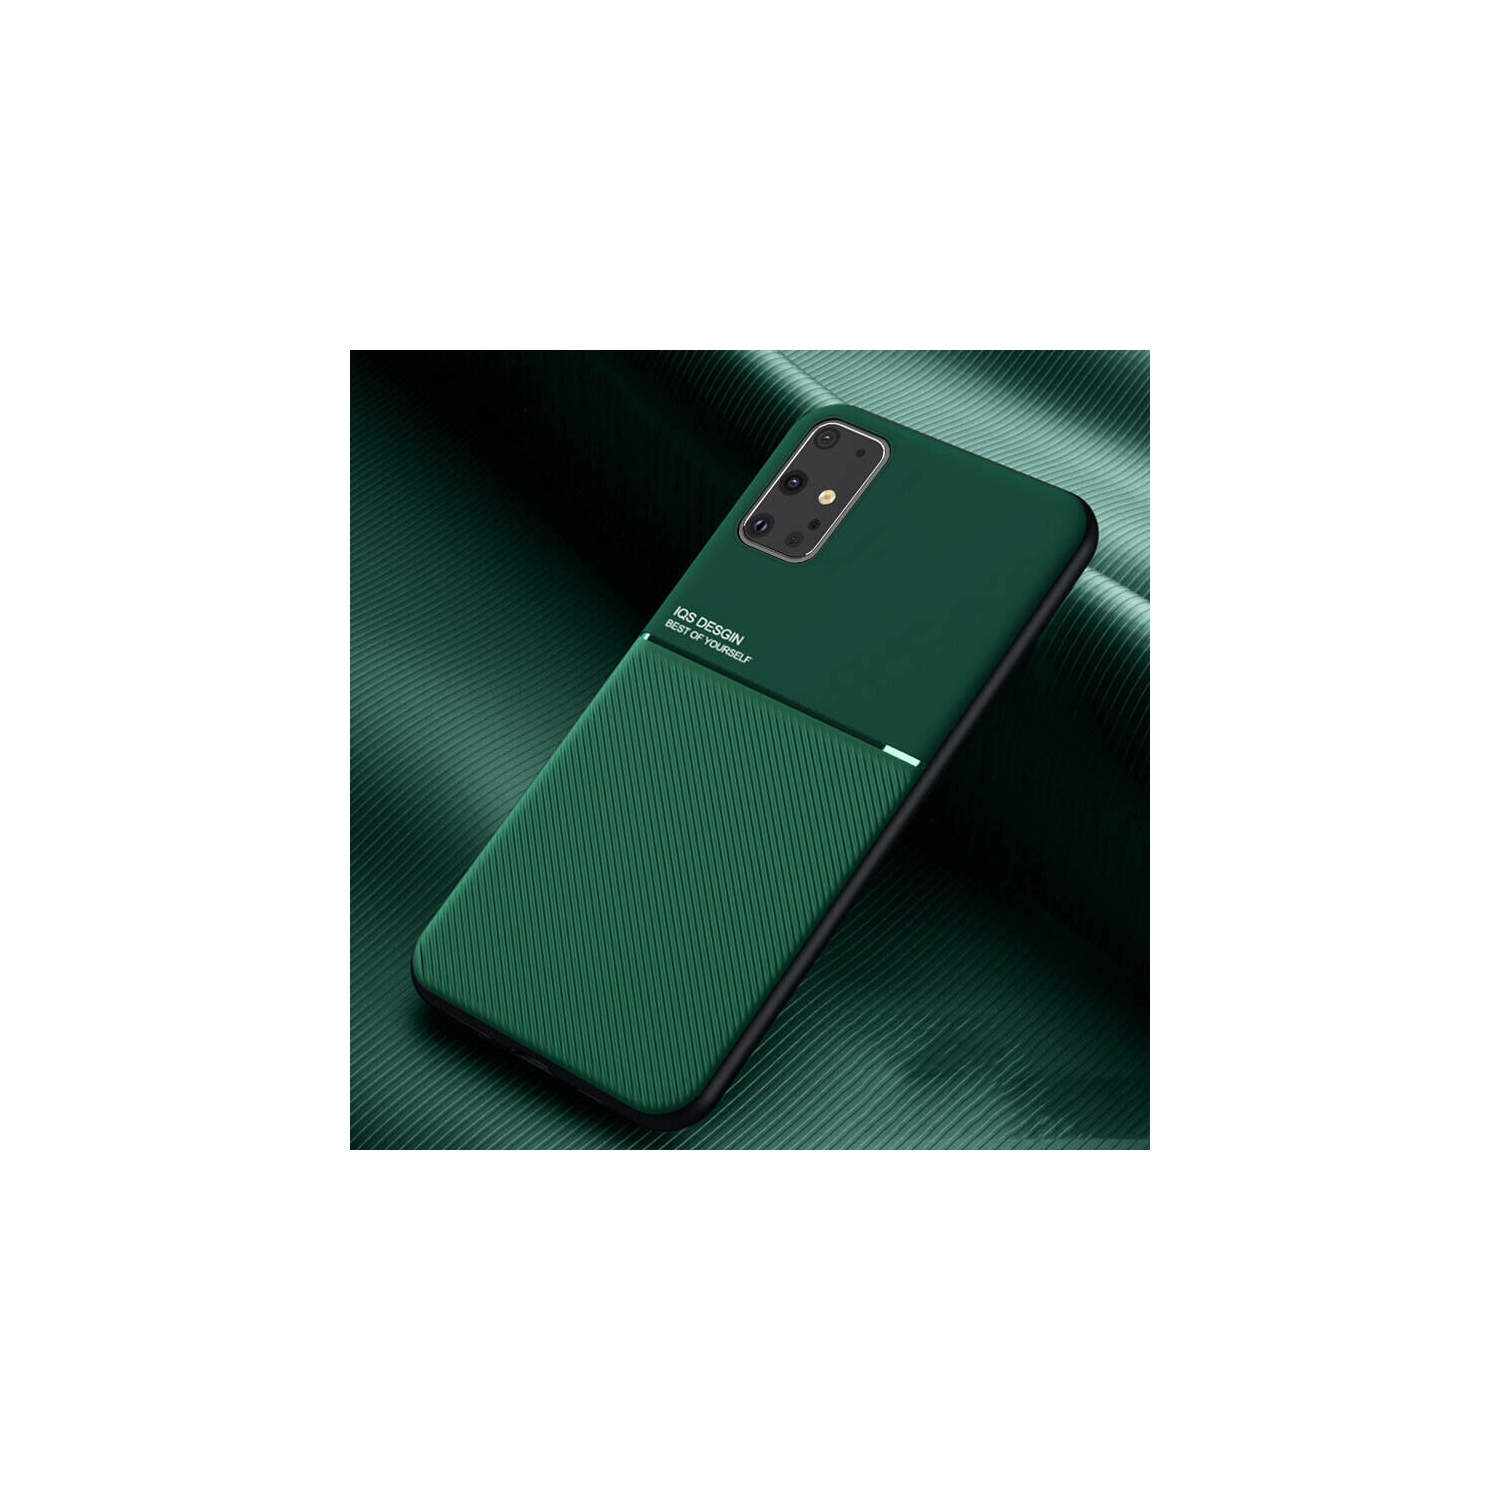 Slim Leather Magnetic Texture Slim Matte Back Phone Cove Cases For Samsung Galaxy S20 FE (Green)